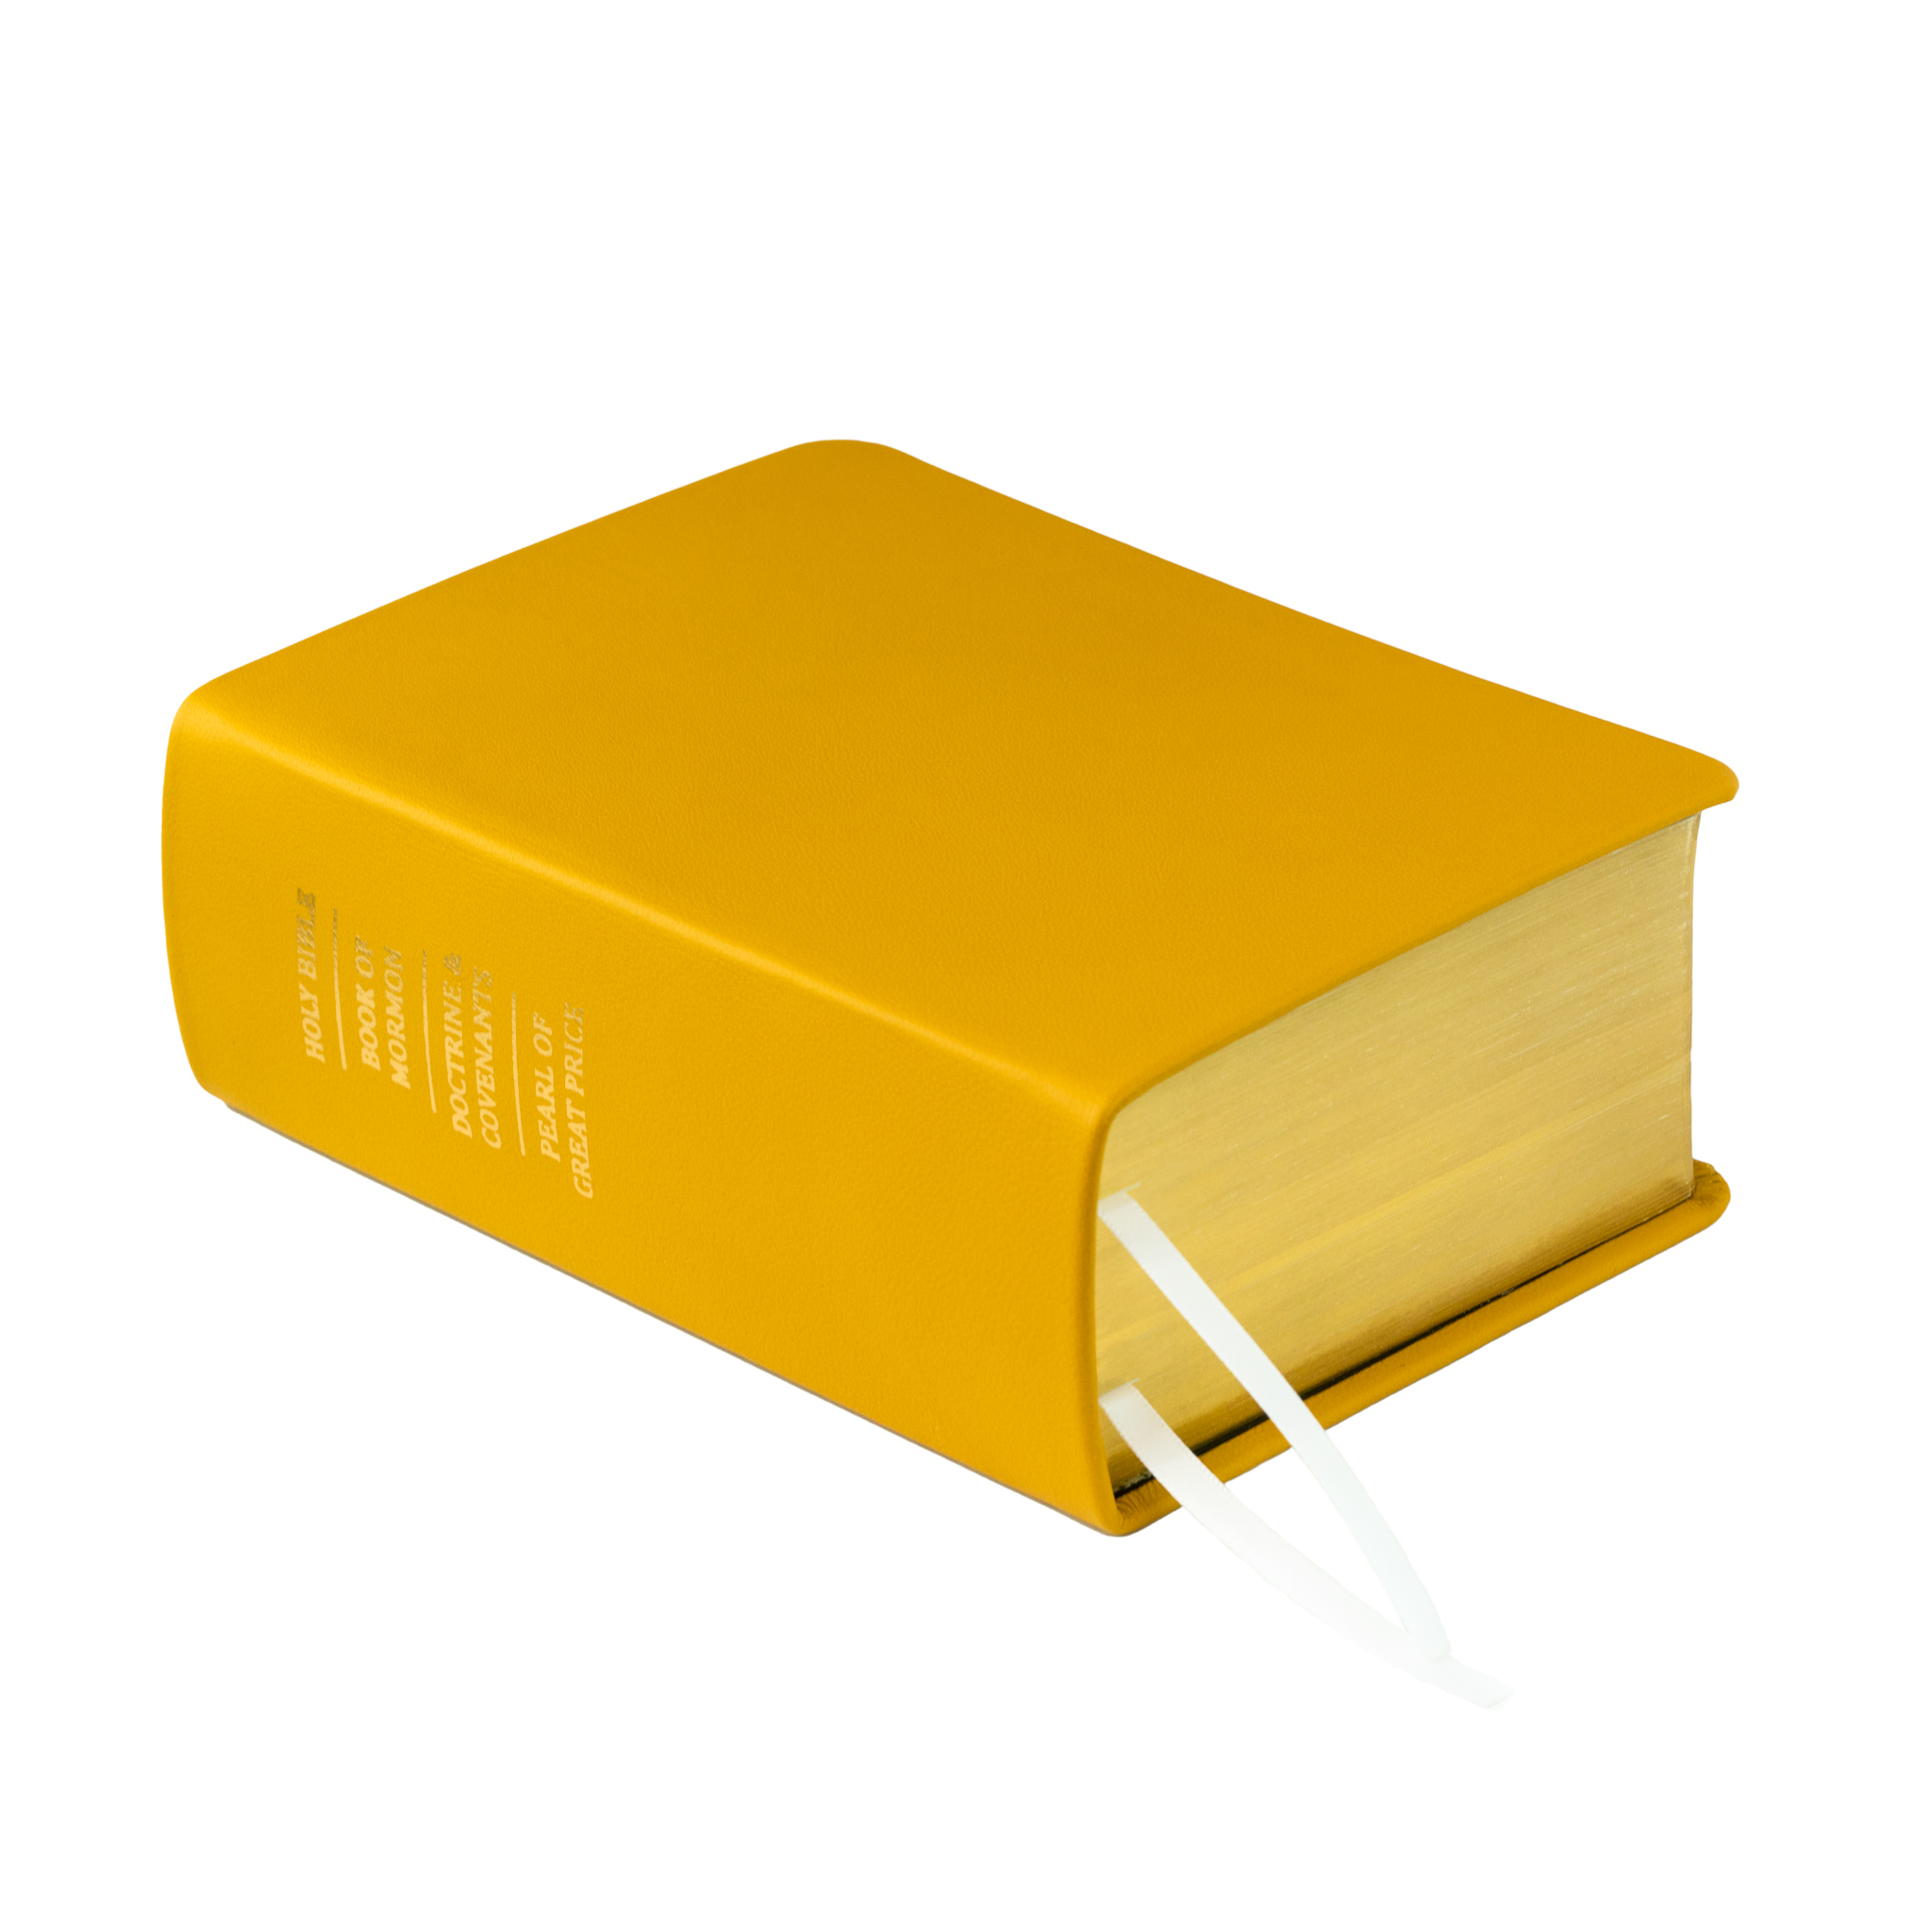 Pre-Made Hand-Bound Genuine Leather Quad - Canary Yellow - LDP-HB-RQ-CNY-PM